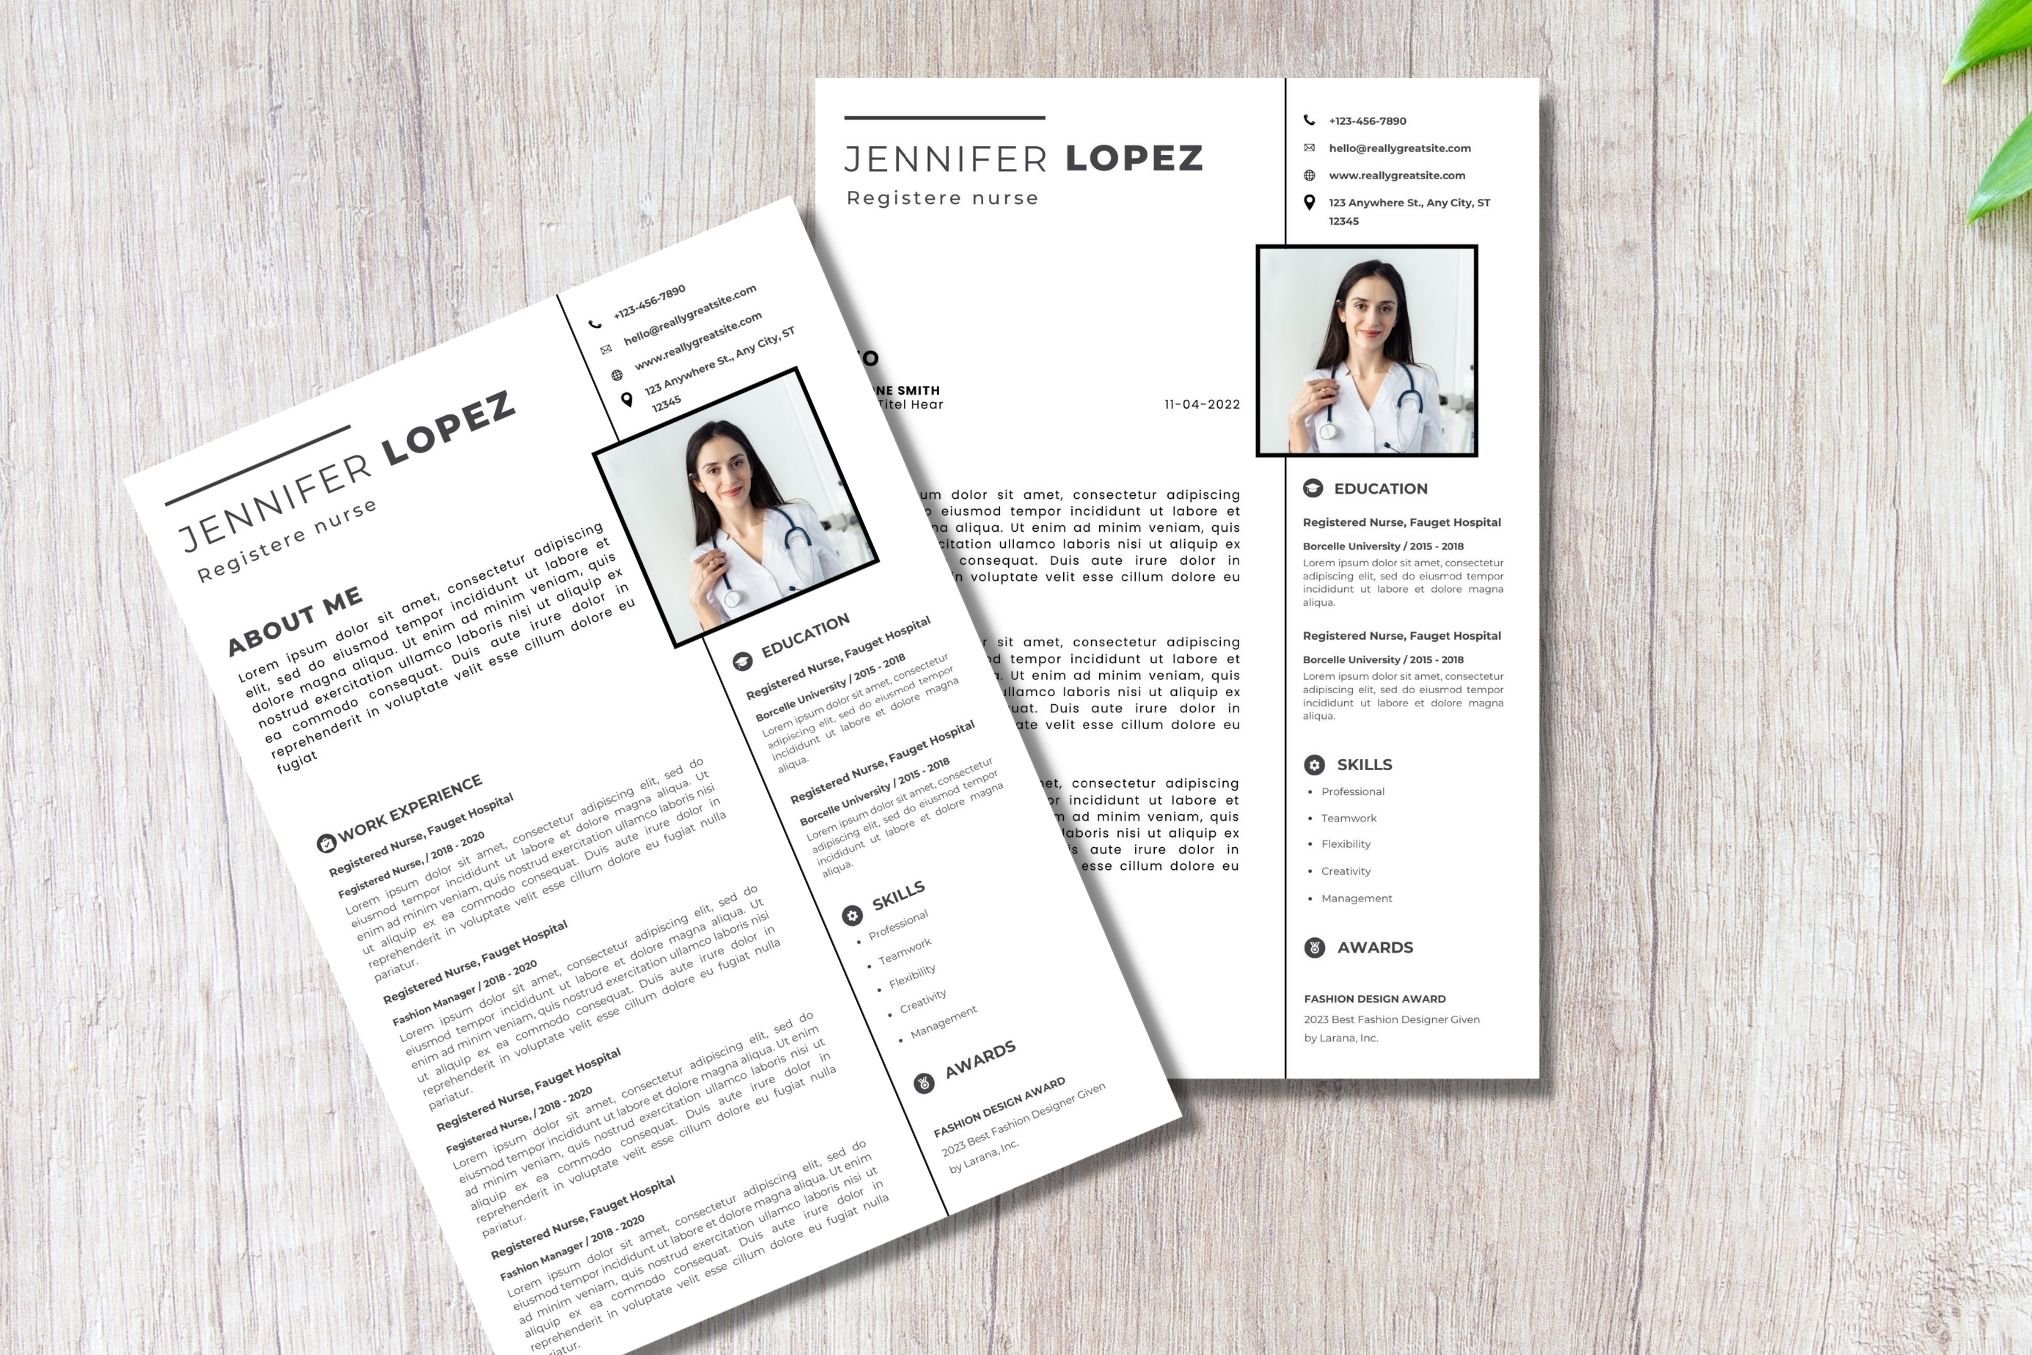 Two professional resume templates on a wooden table.